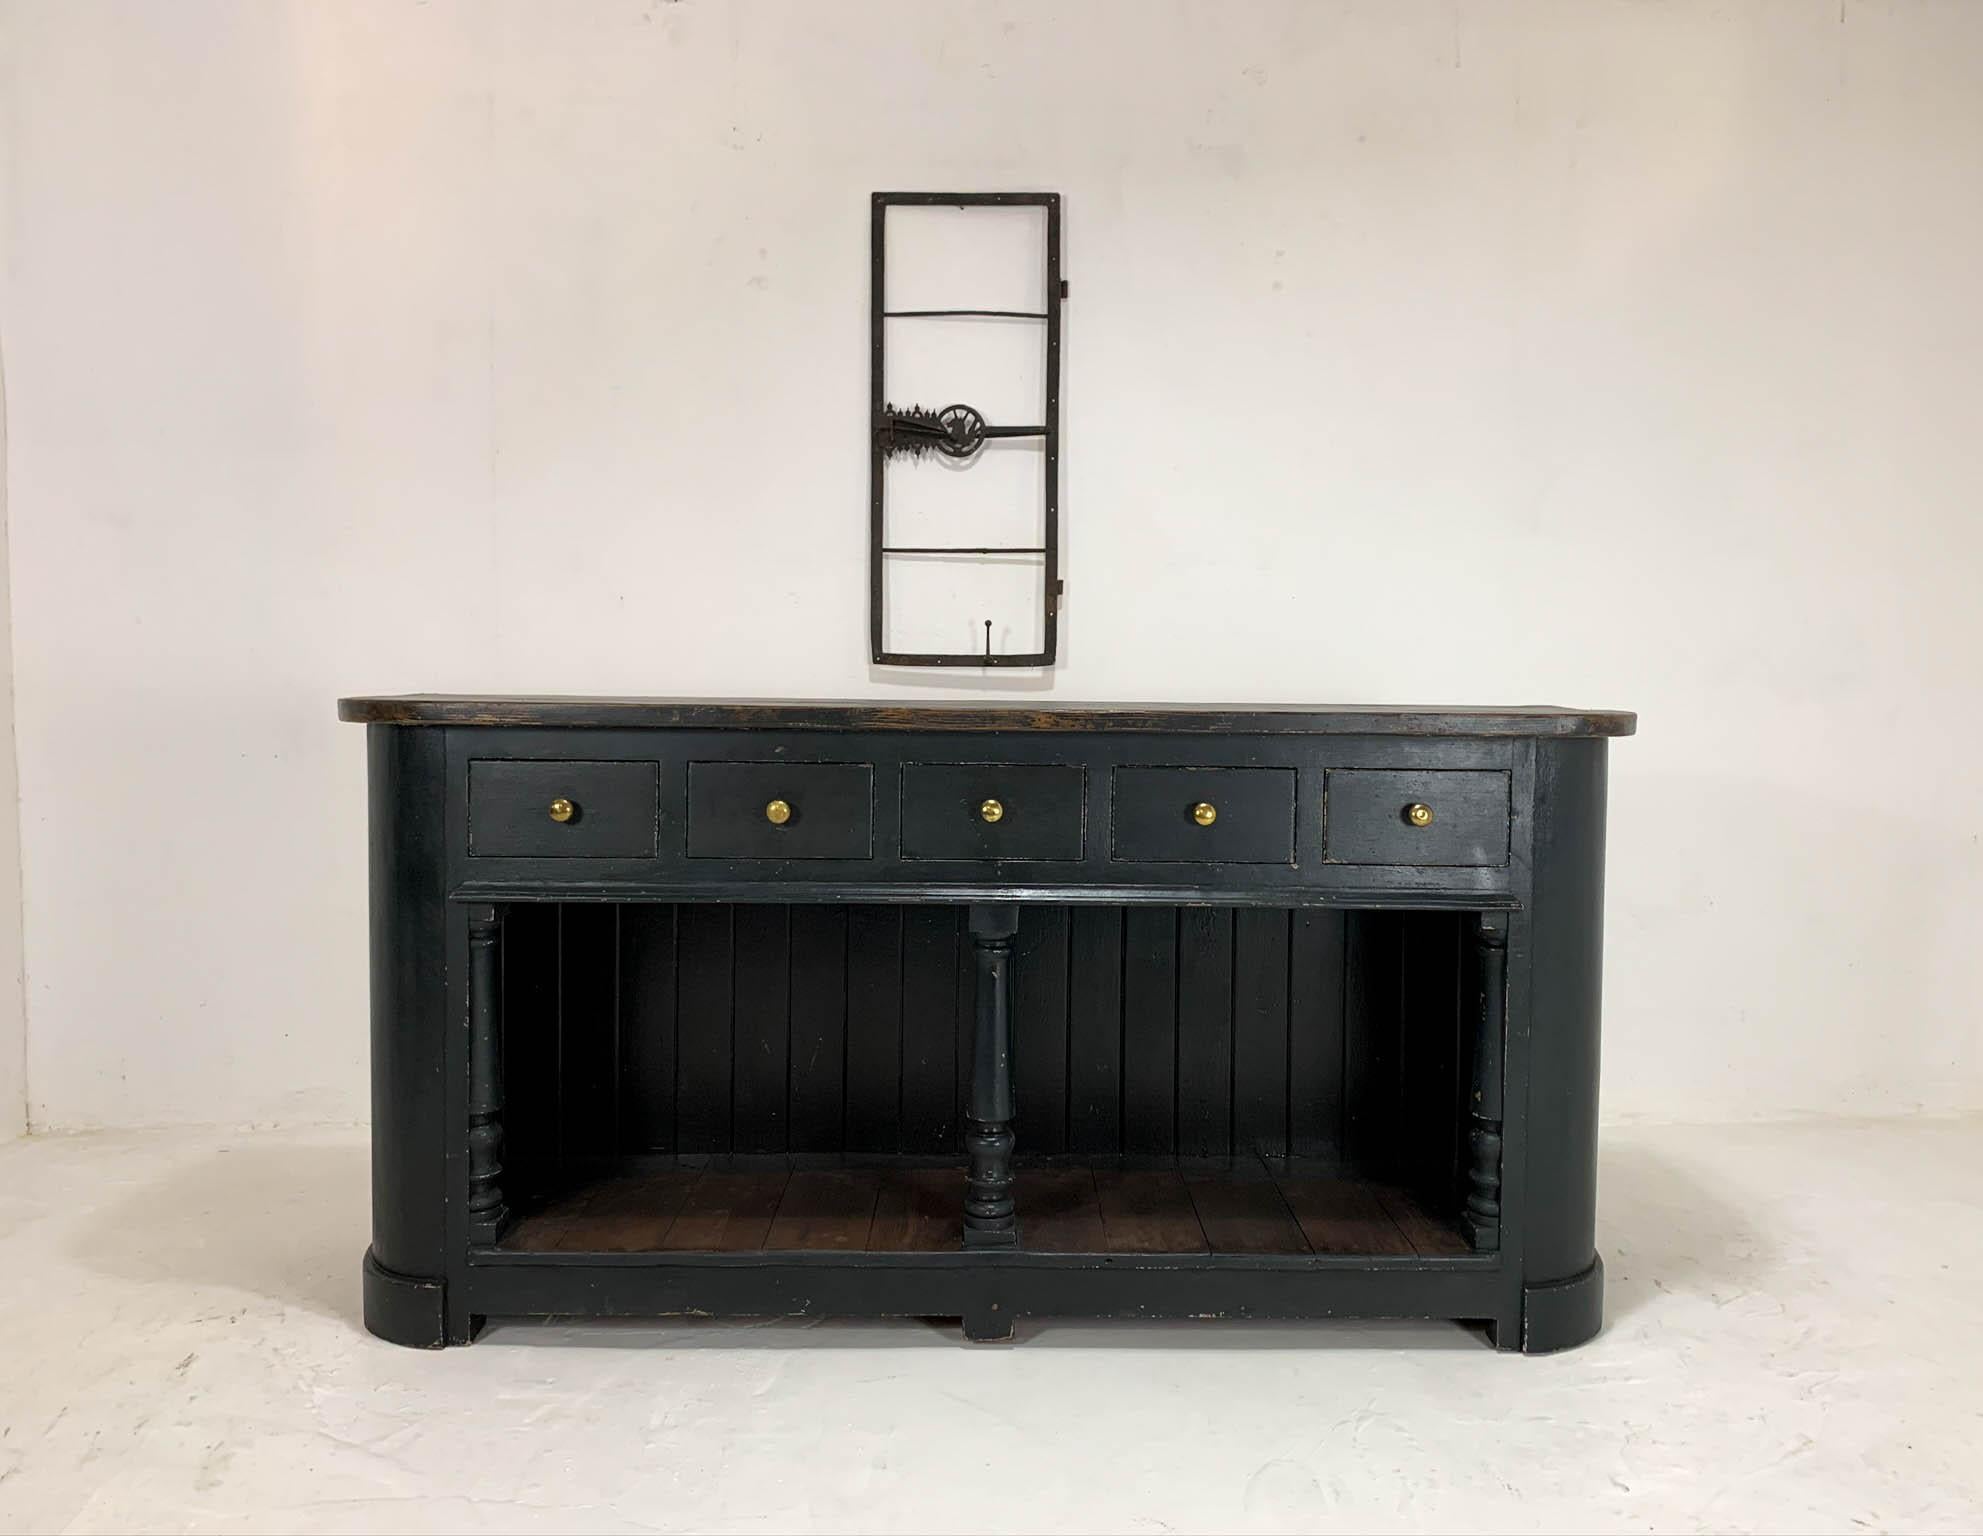 Fully restored English dresser base dating from the 19th century, featuring five small drawers with original handles, a potting board below and later black paint.
Fantastic piece that would sit well in any room of the home.